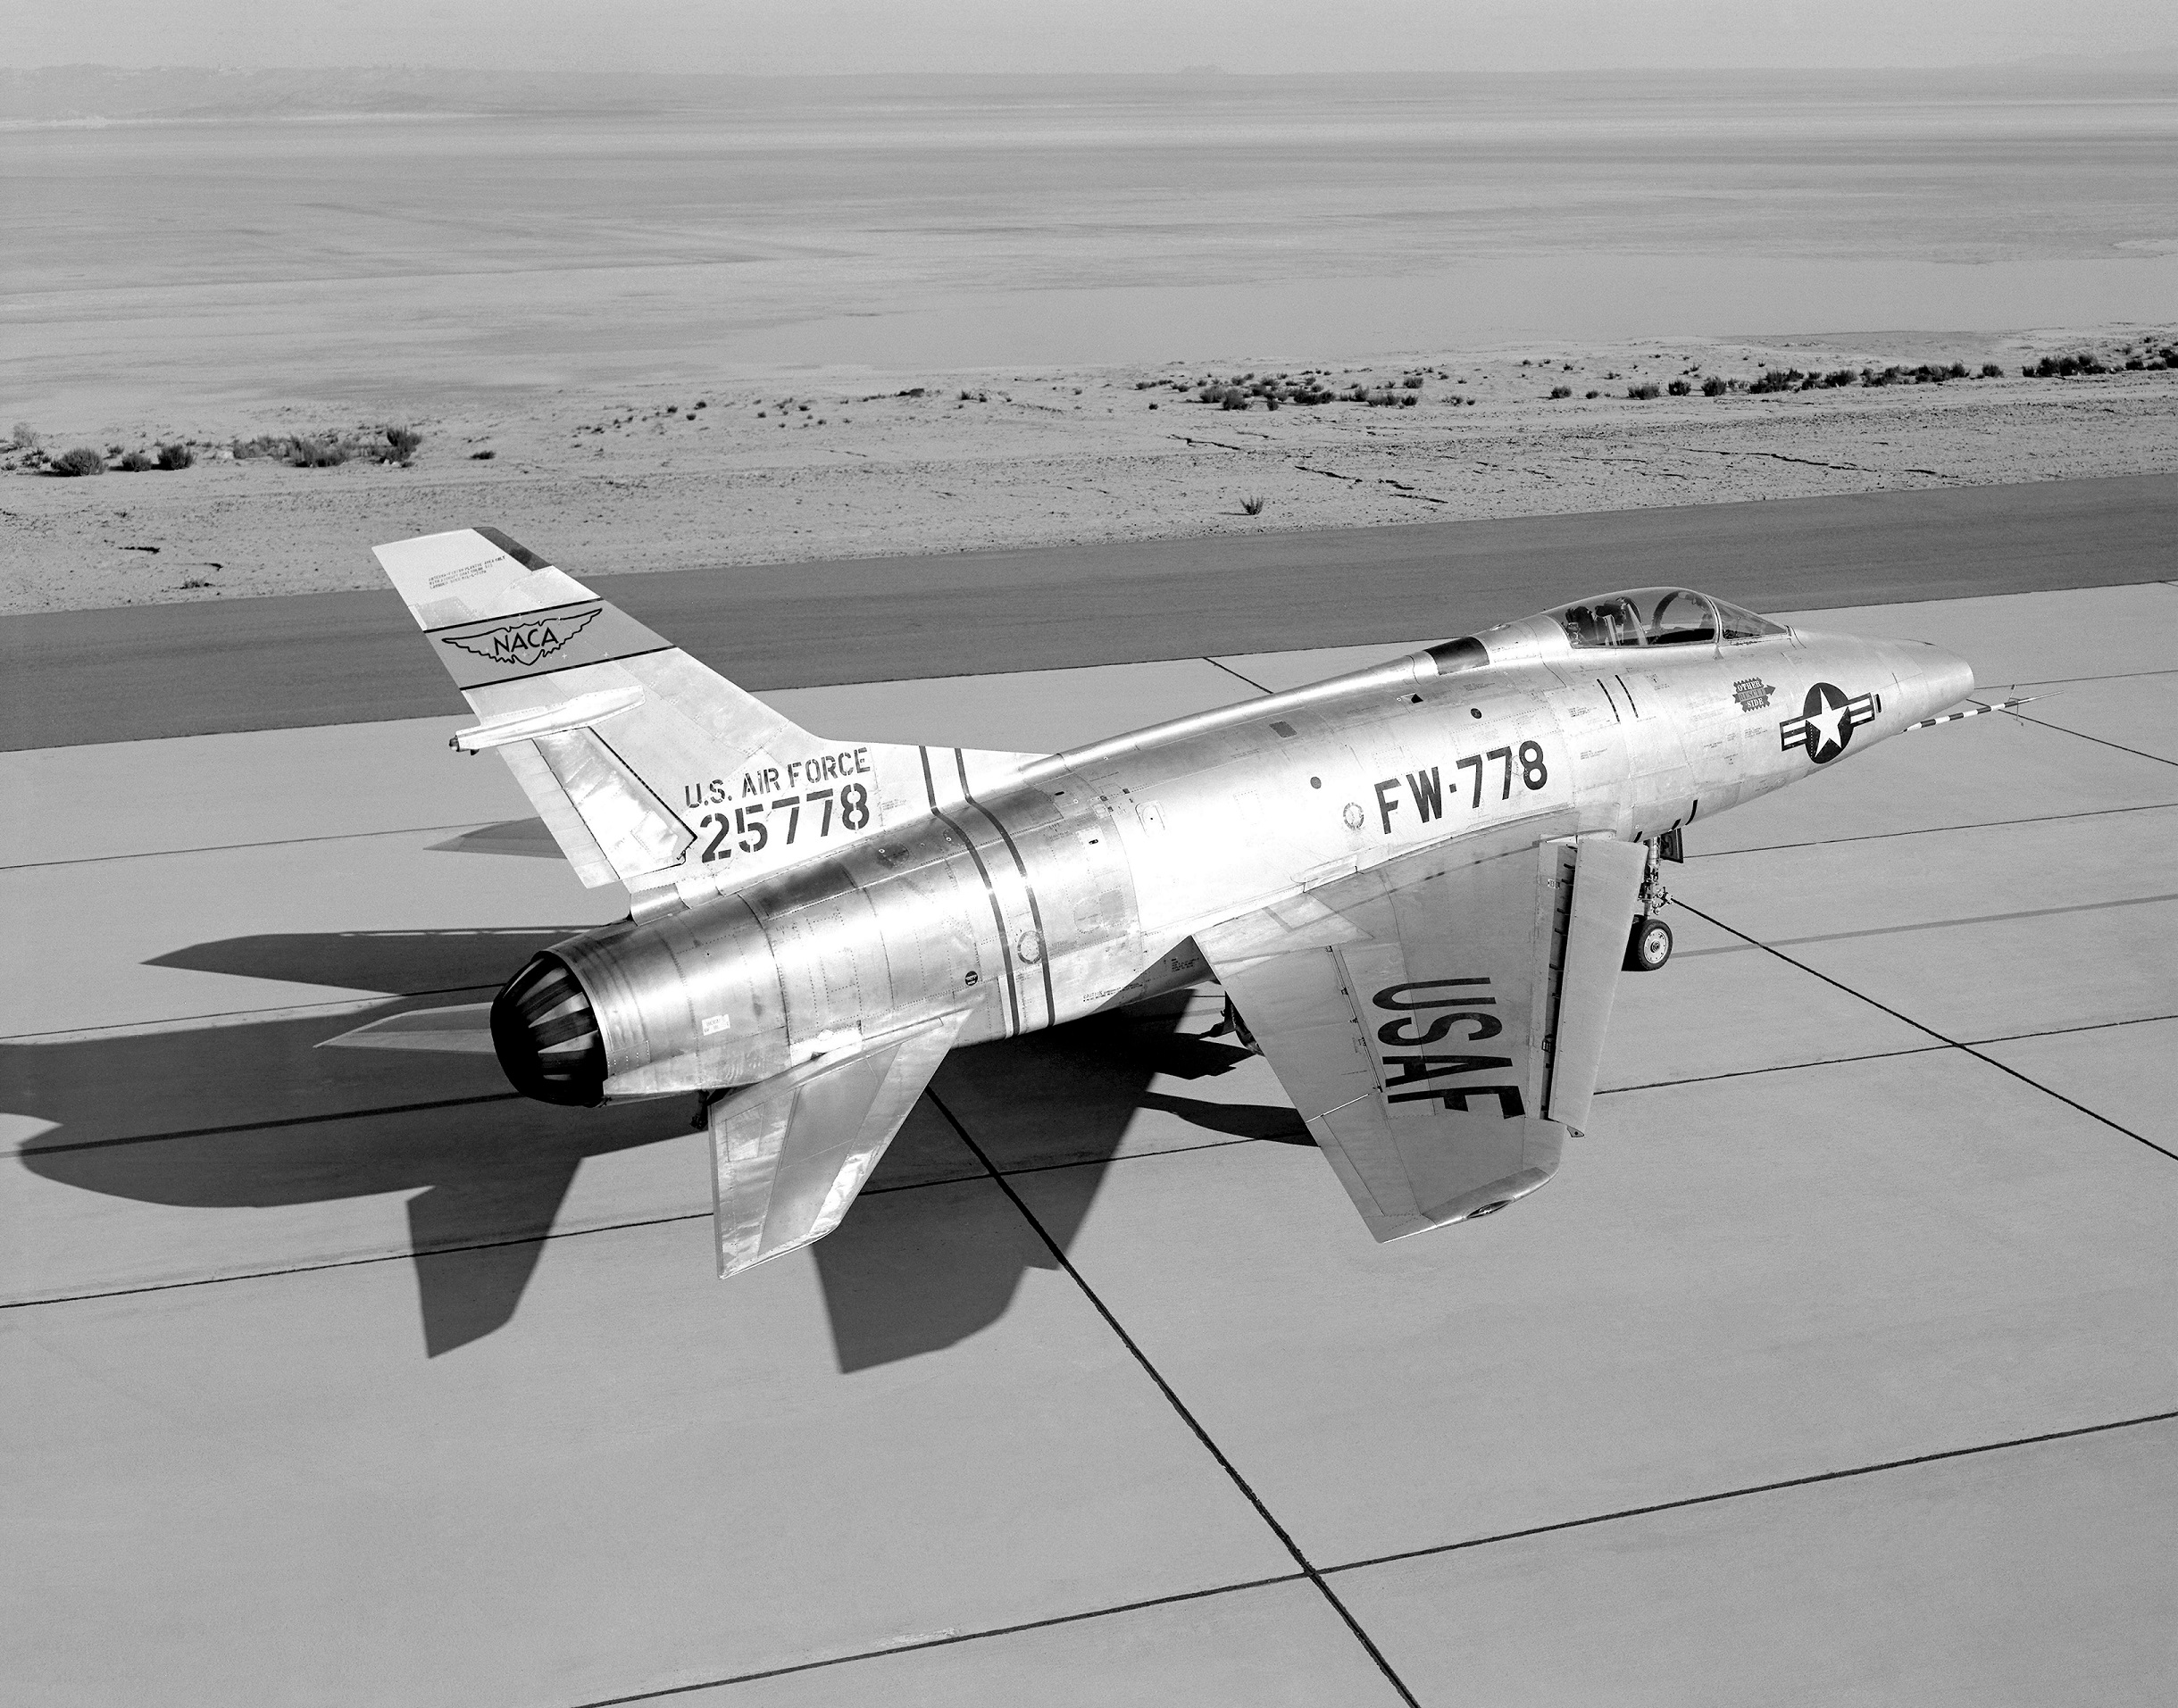 North American Aviation F-100A-5-NA Super Sabre 52-5778 parked on the ramp in front of the NACA hangar, Edwards Air Force Base, California, 1959. (NASA)